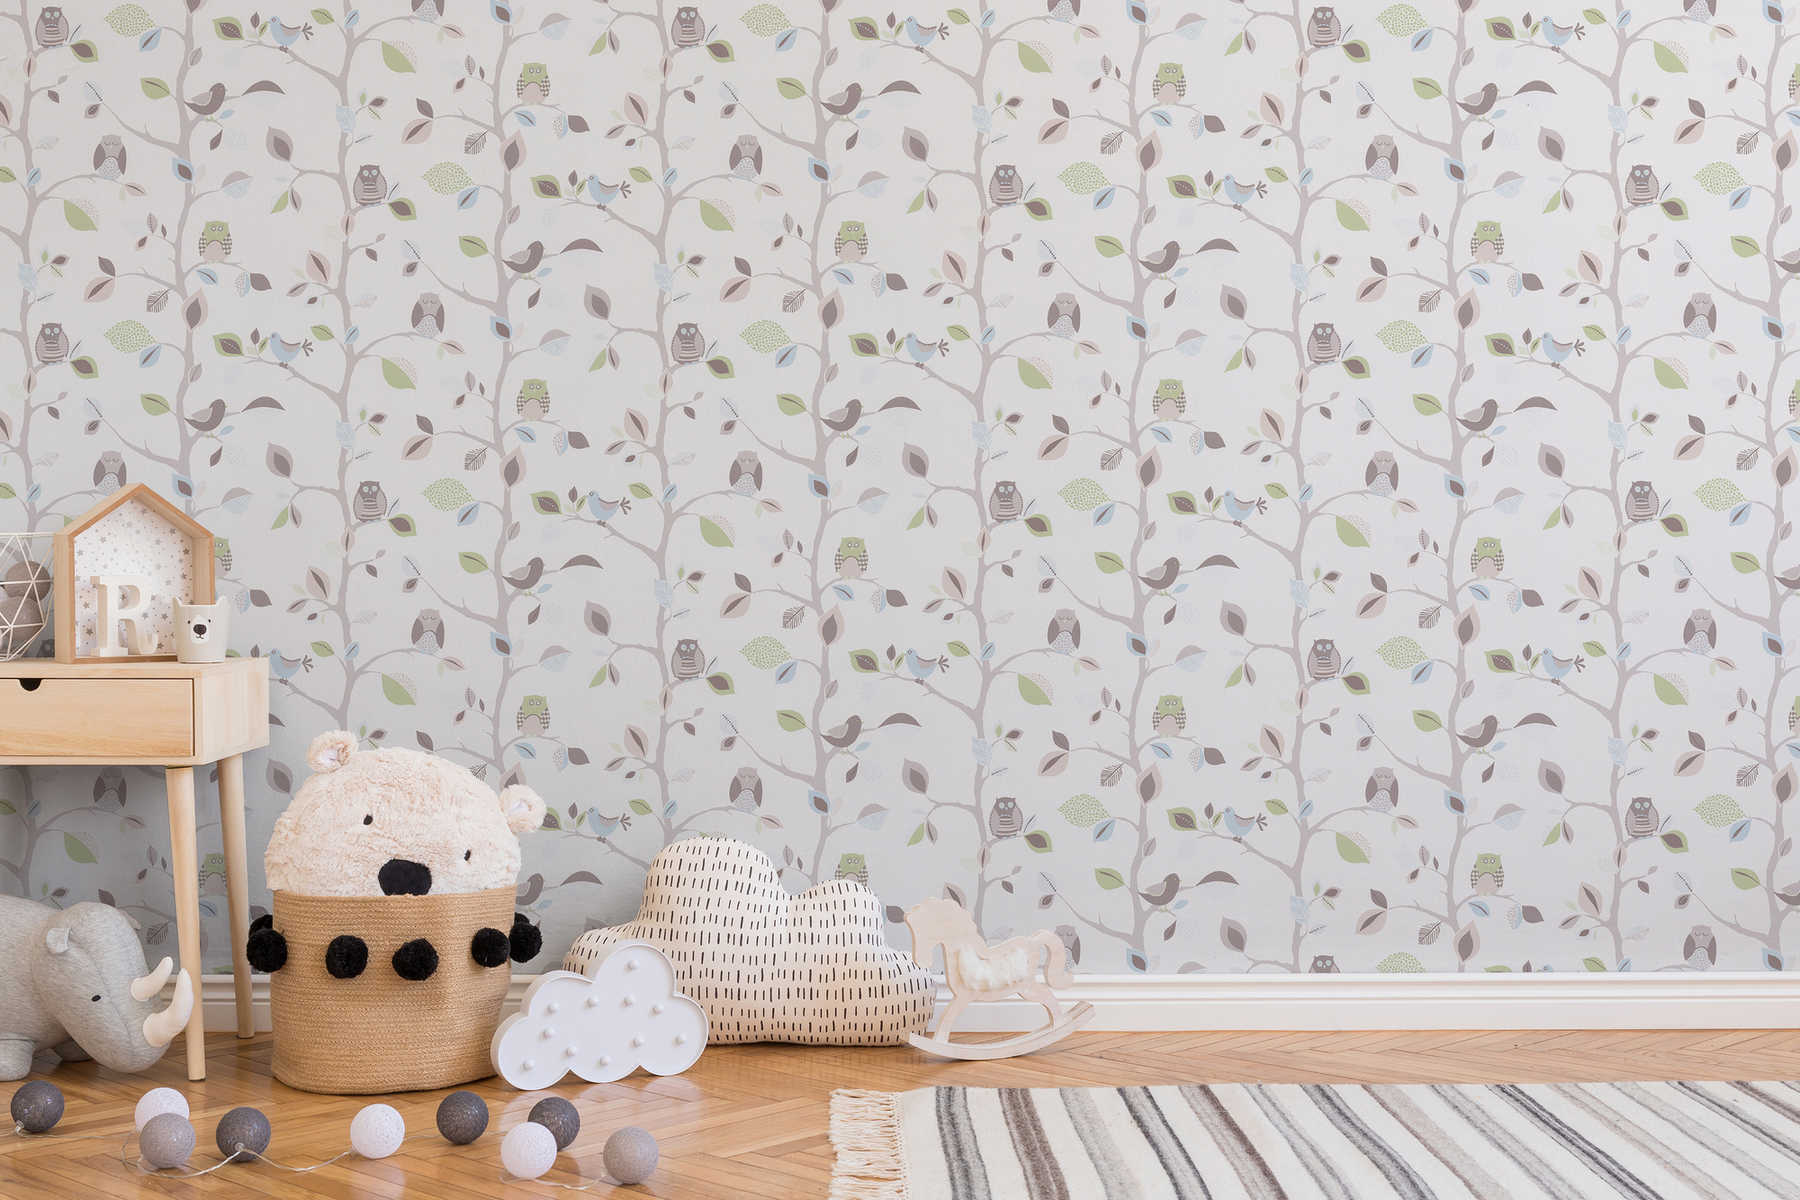             Nursery wallpaper paper with forest and owls - colourful, green
        